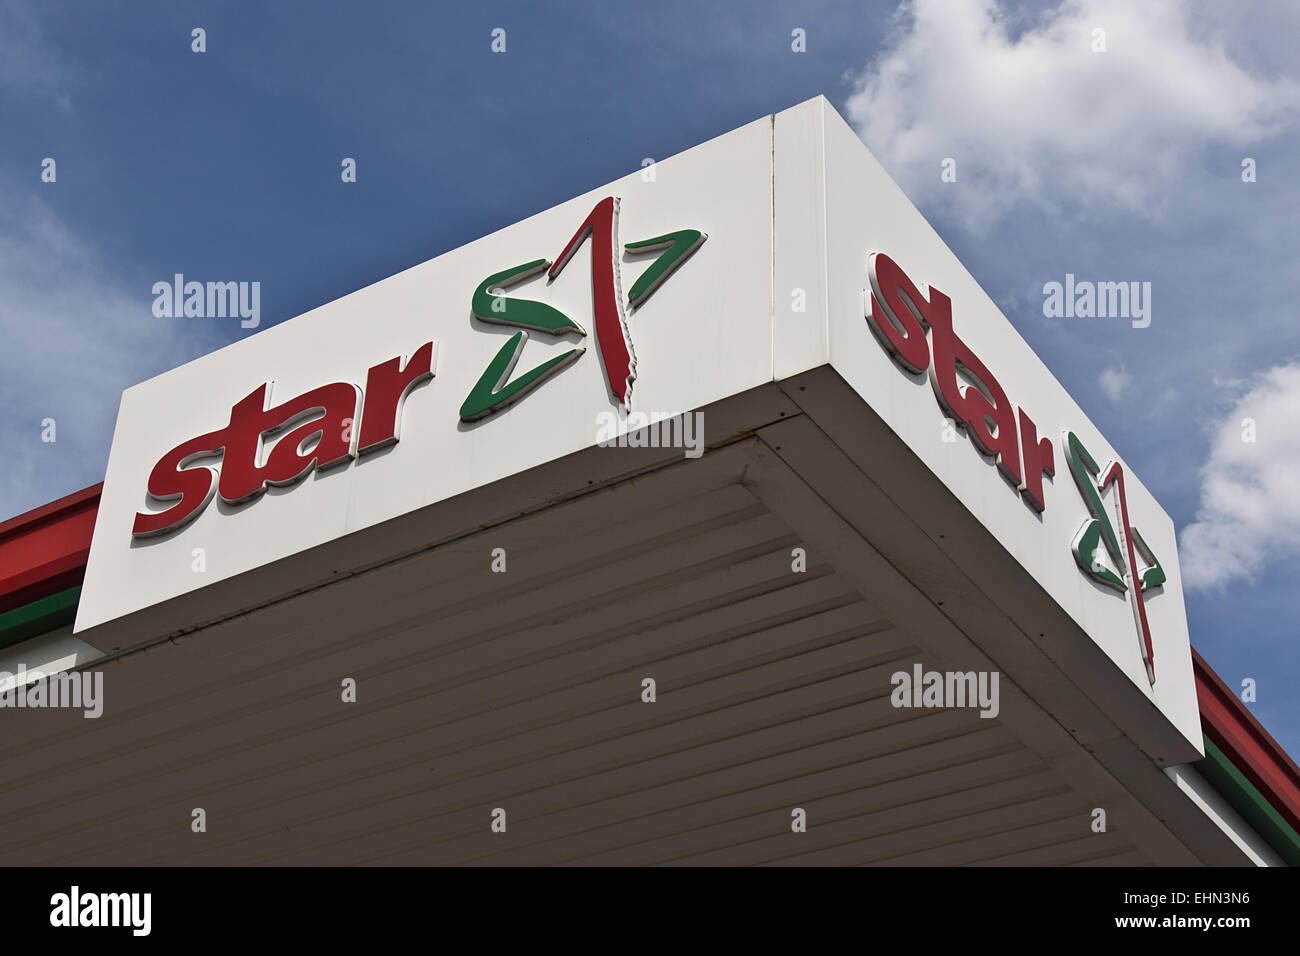 Star gas station Stock Photo